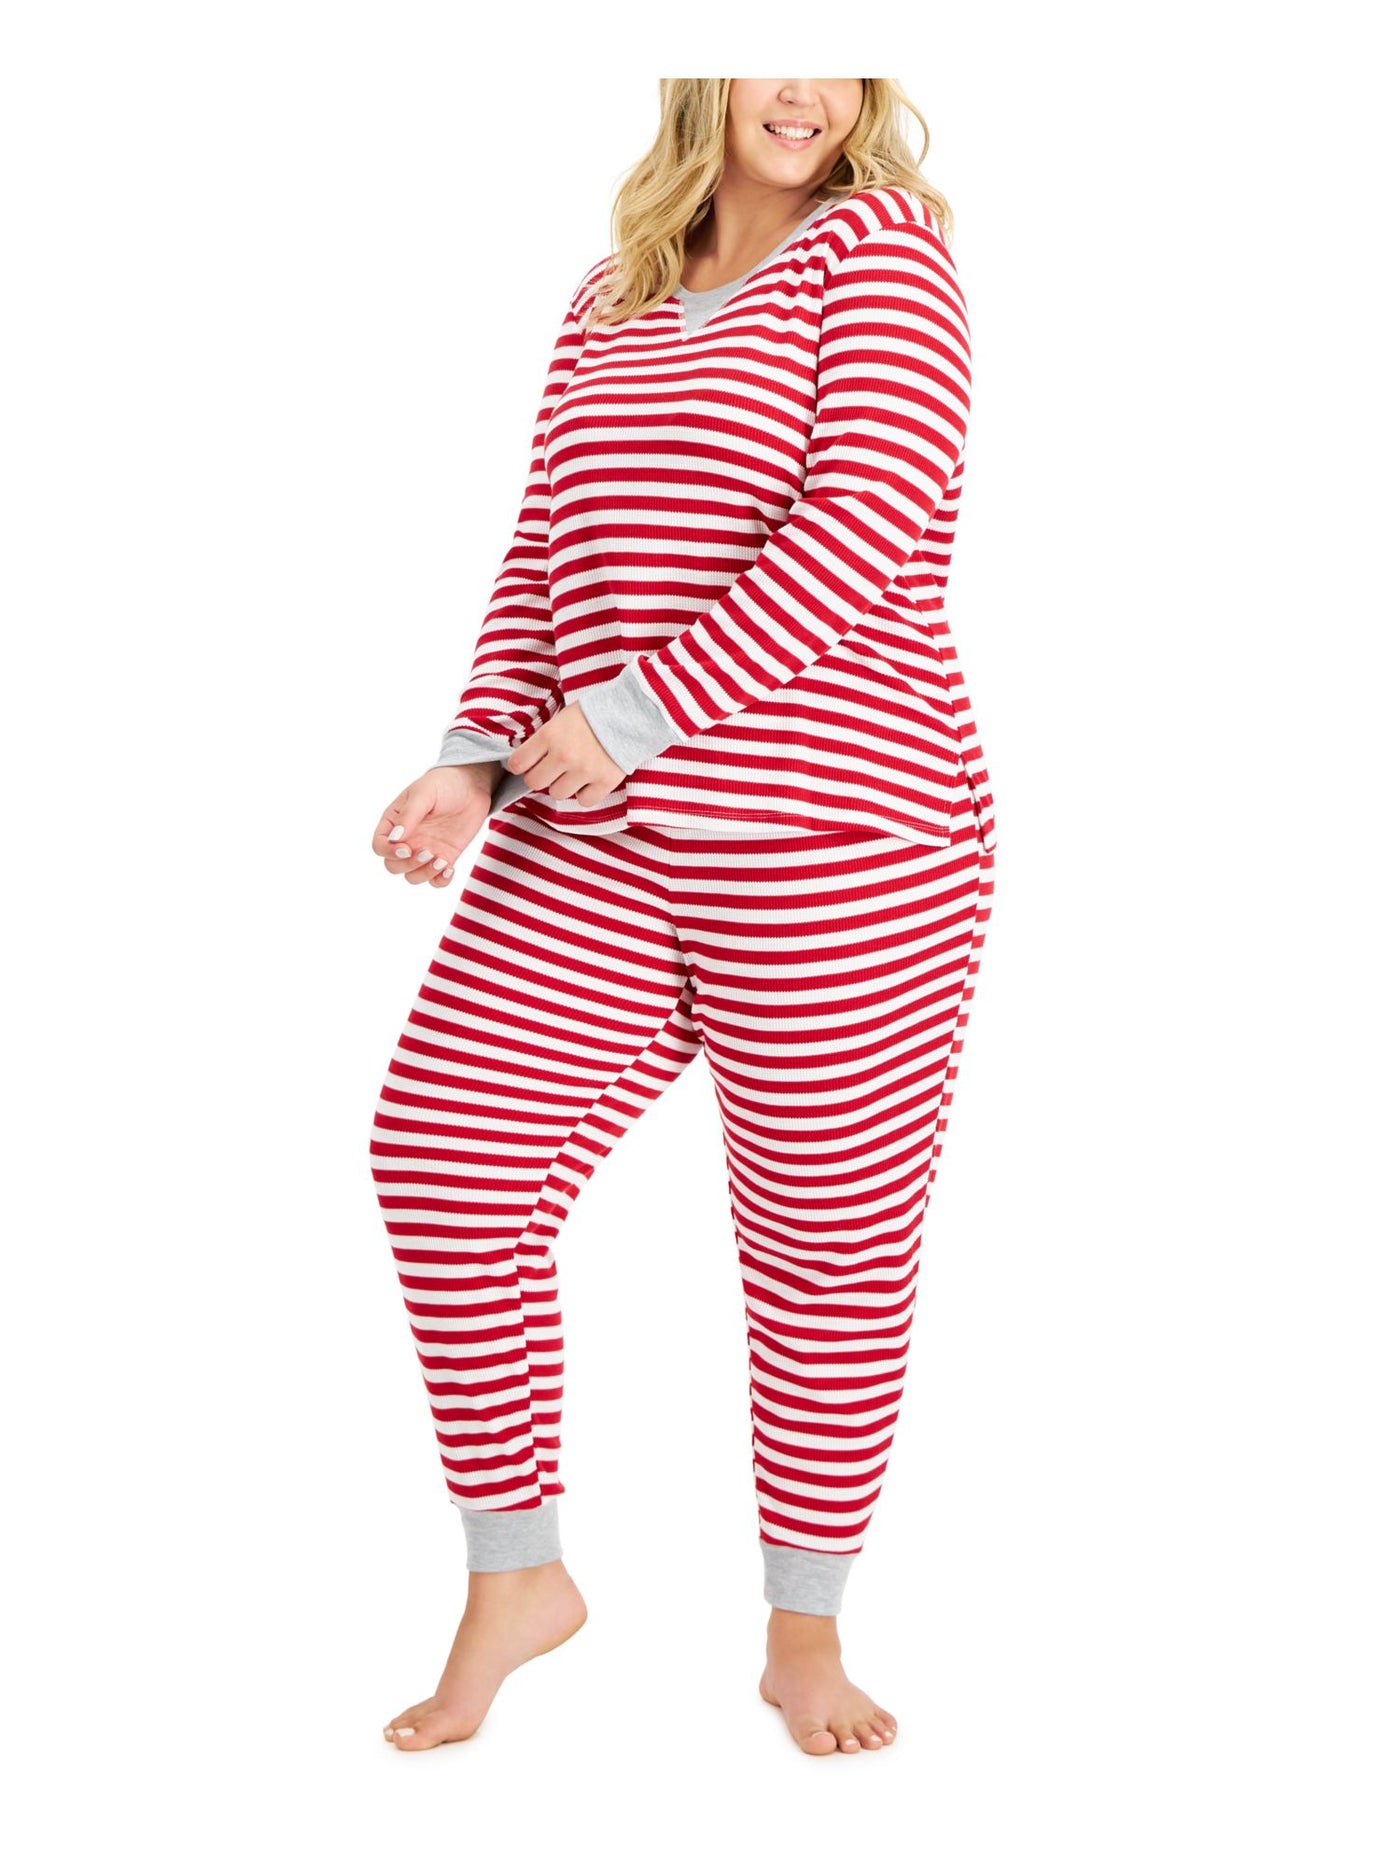 FAMILY PJs Womens Red Striped Top Long Sleeve Cuffed Pants Stretch Pajamas Plus 2X